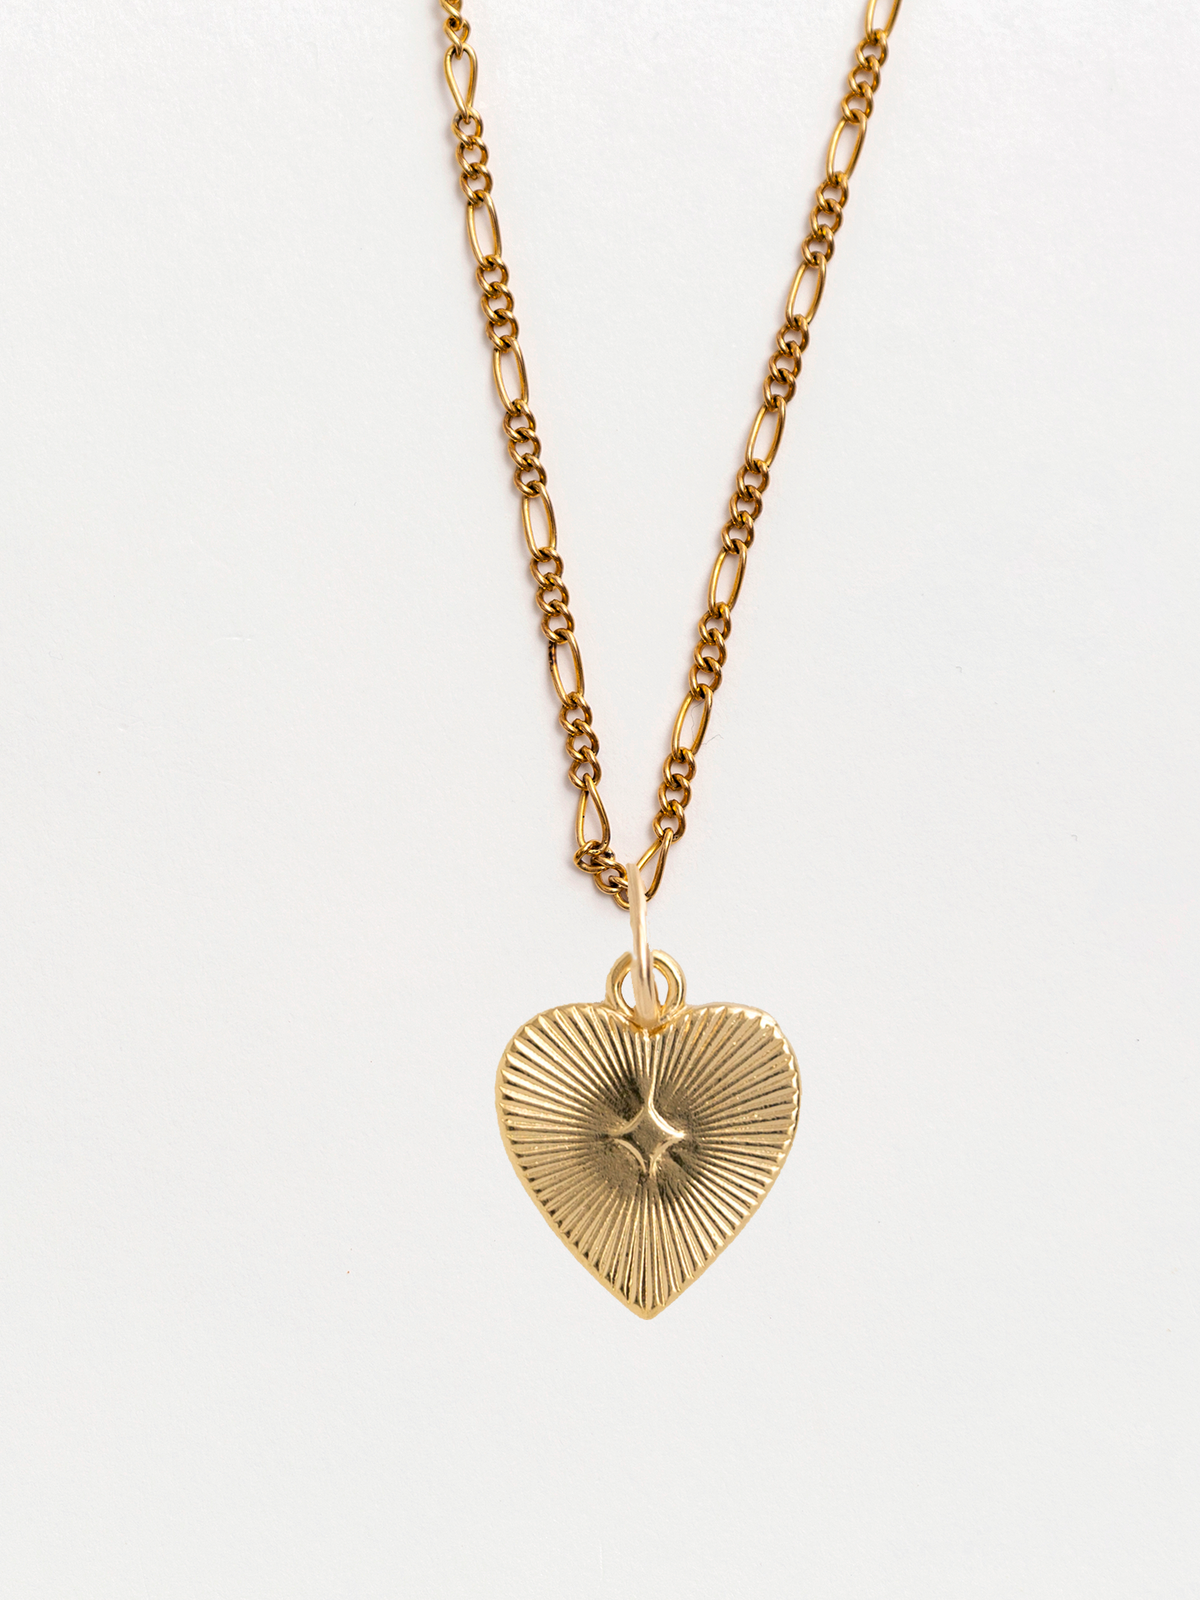 14K Yellow Gold Heart Locket Necklace, 22 - 100% Exclusive